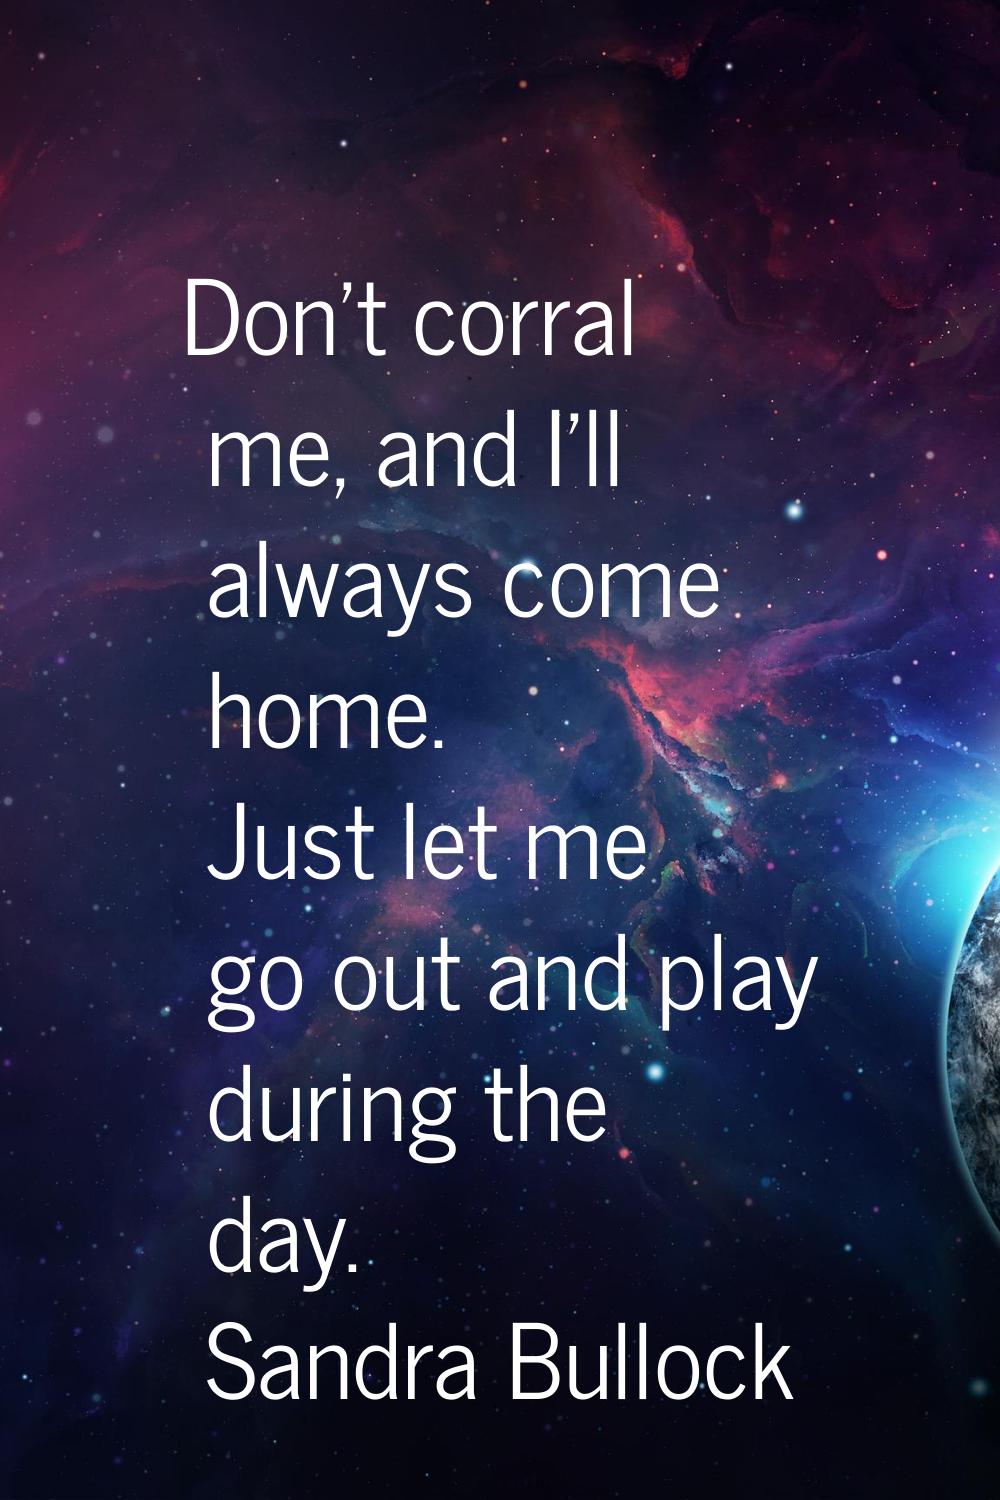 Don't corral me, and I'll always come home. Just let me go out and play during the day.